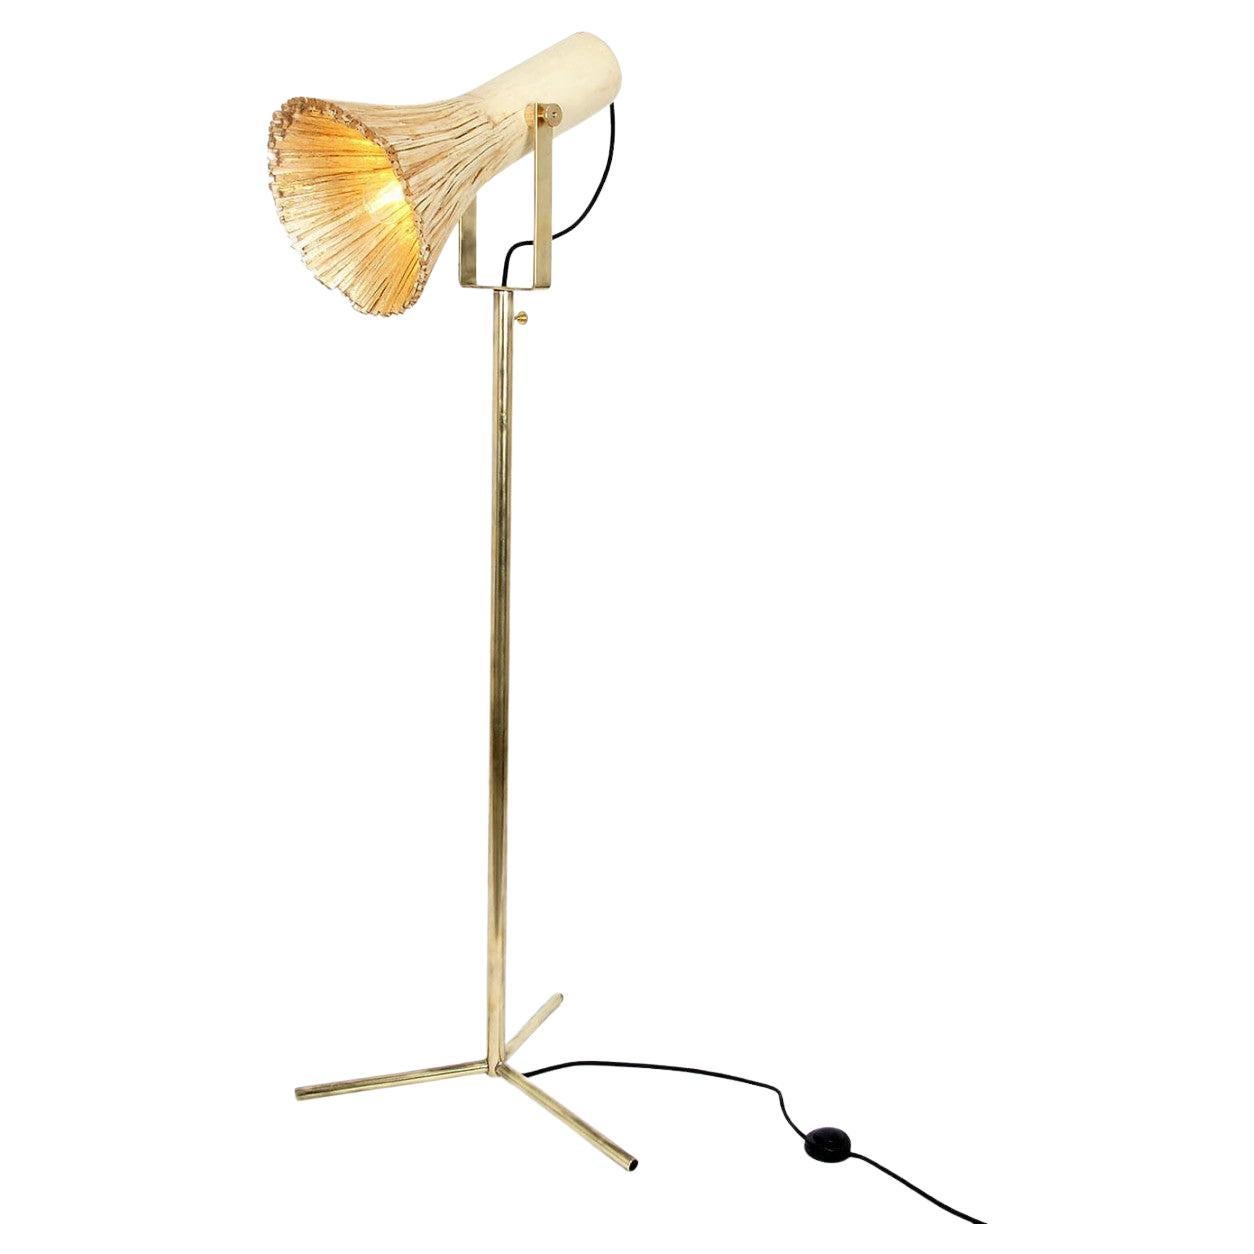 Contemporary Wood & Brass Floor Lamp, Pressed Wood Natural by Johannes Hemann For Sale